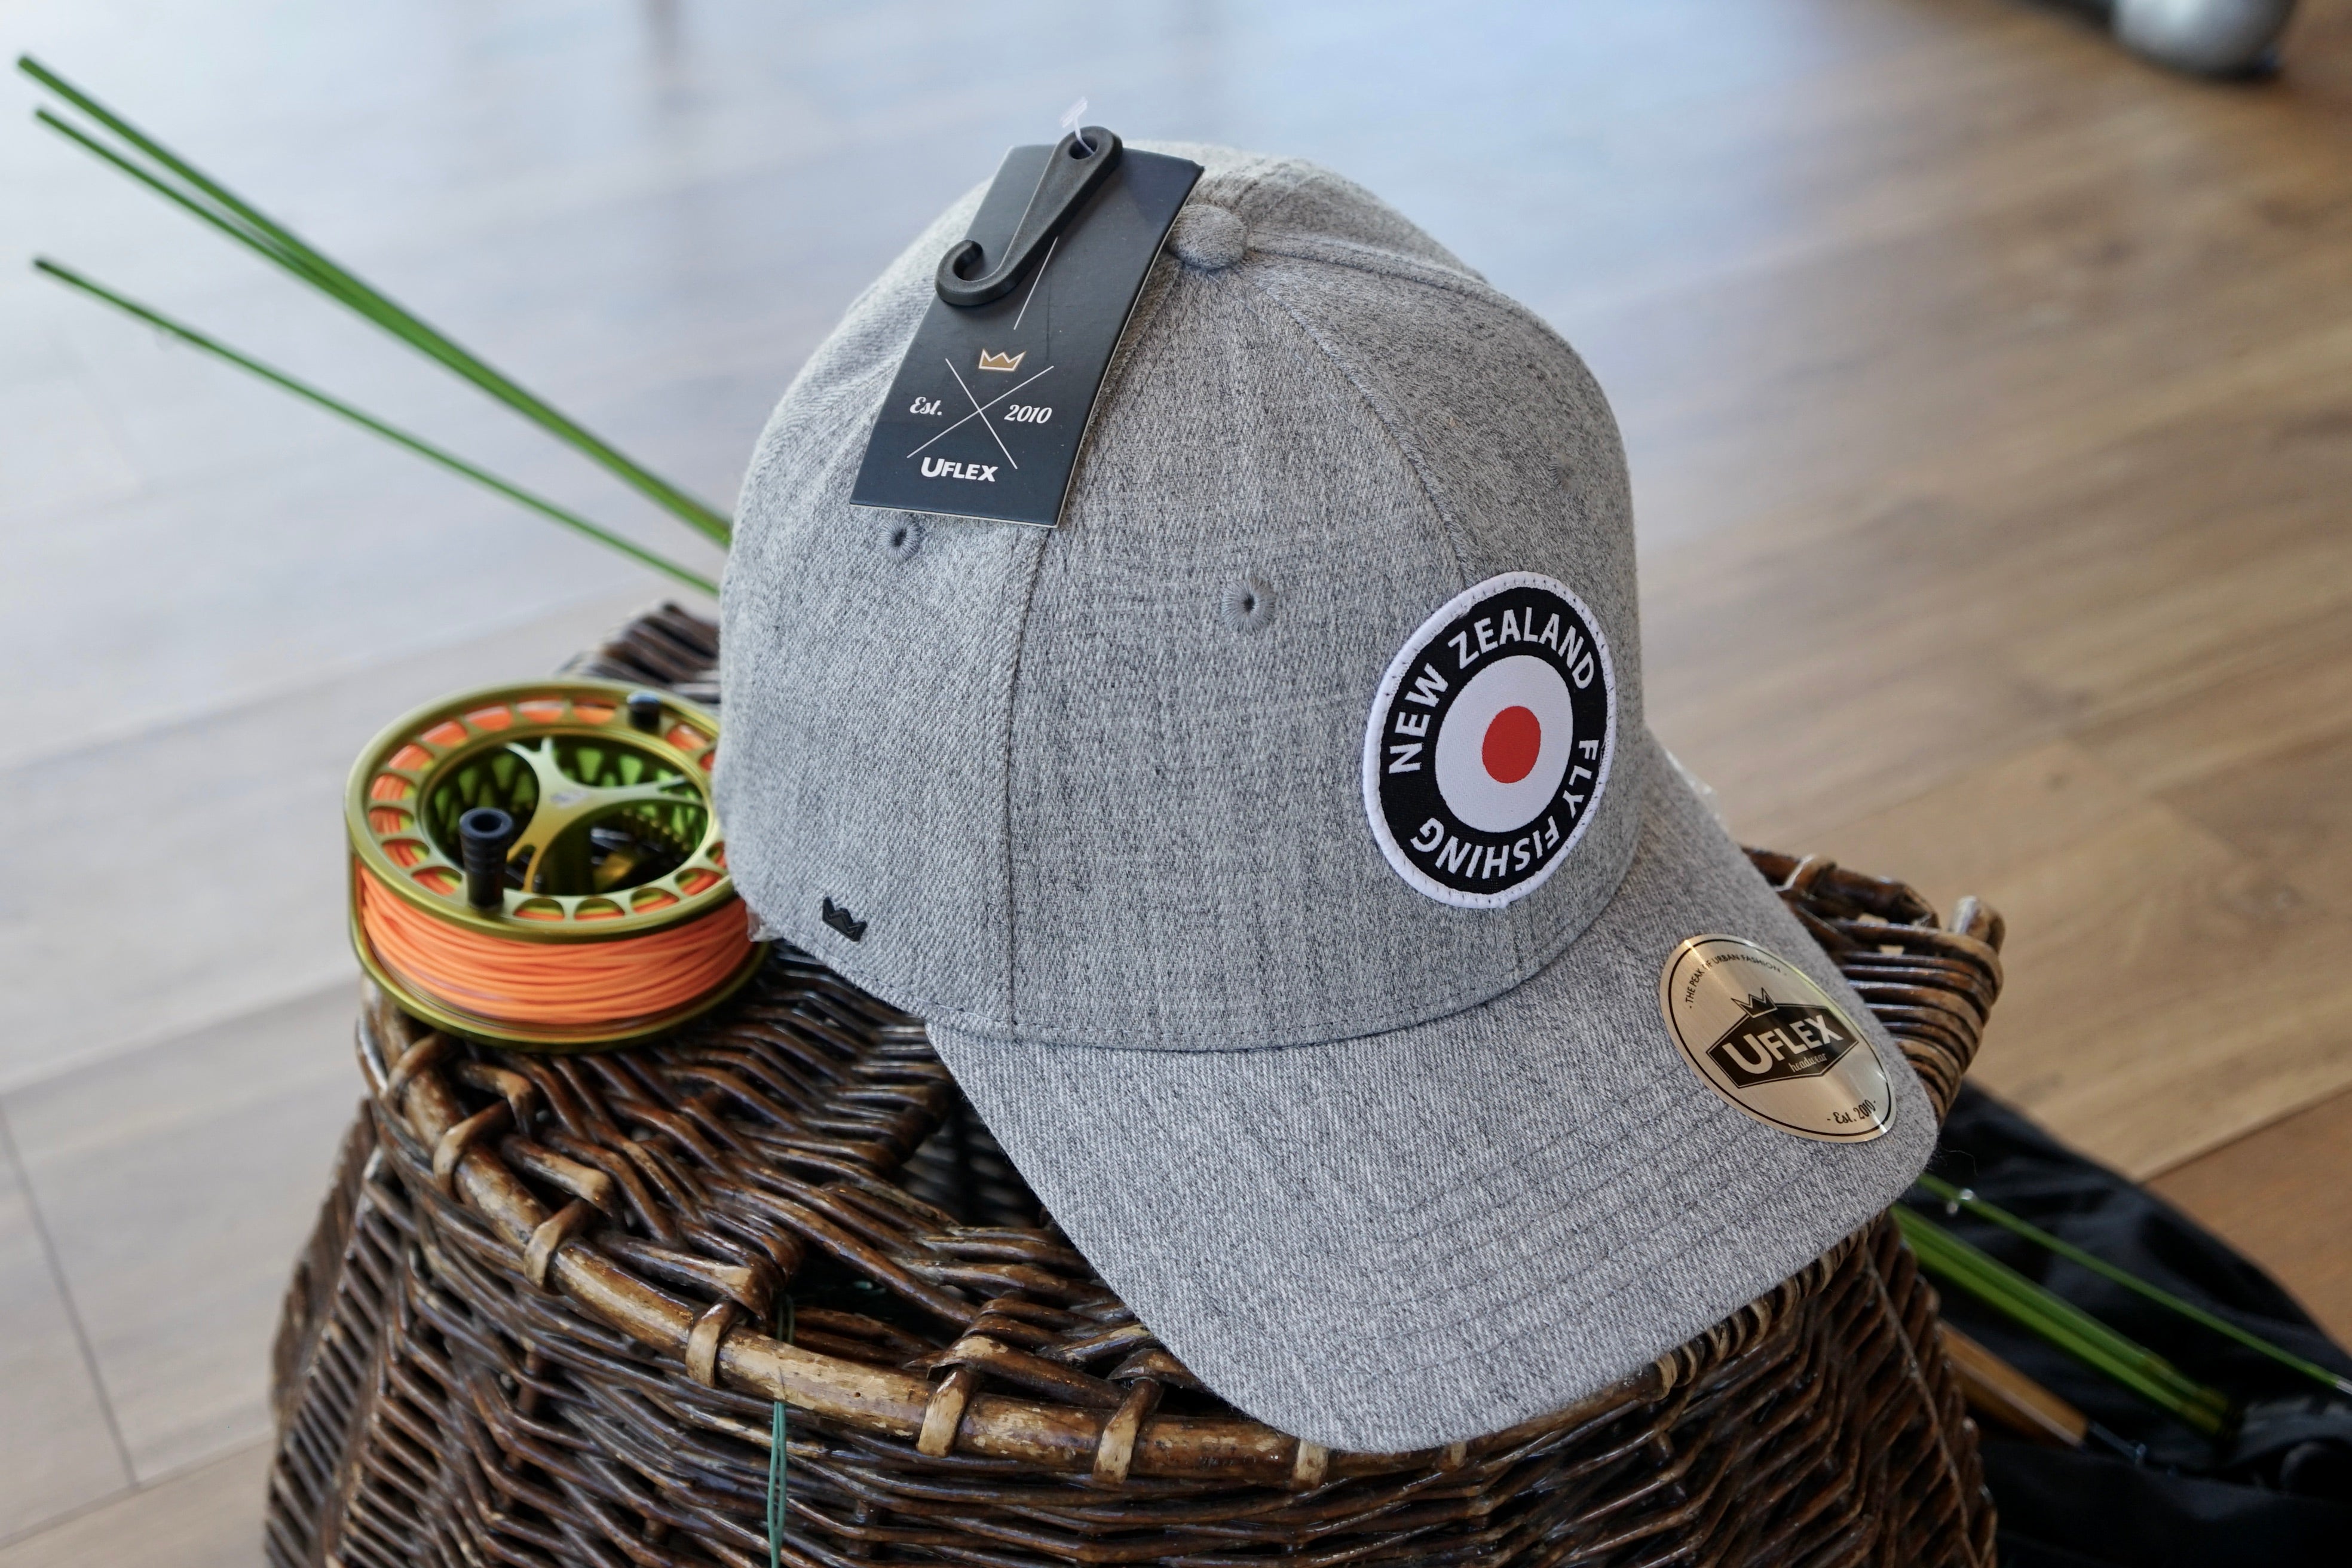 New Zealand Fly Fishing-Pro Fitted Cap